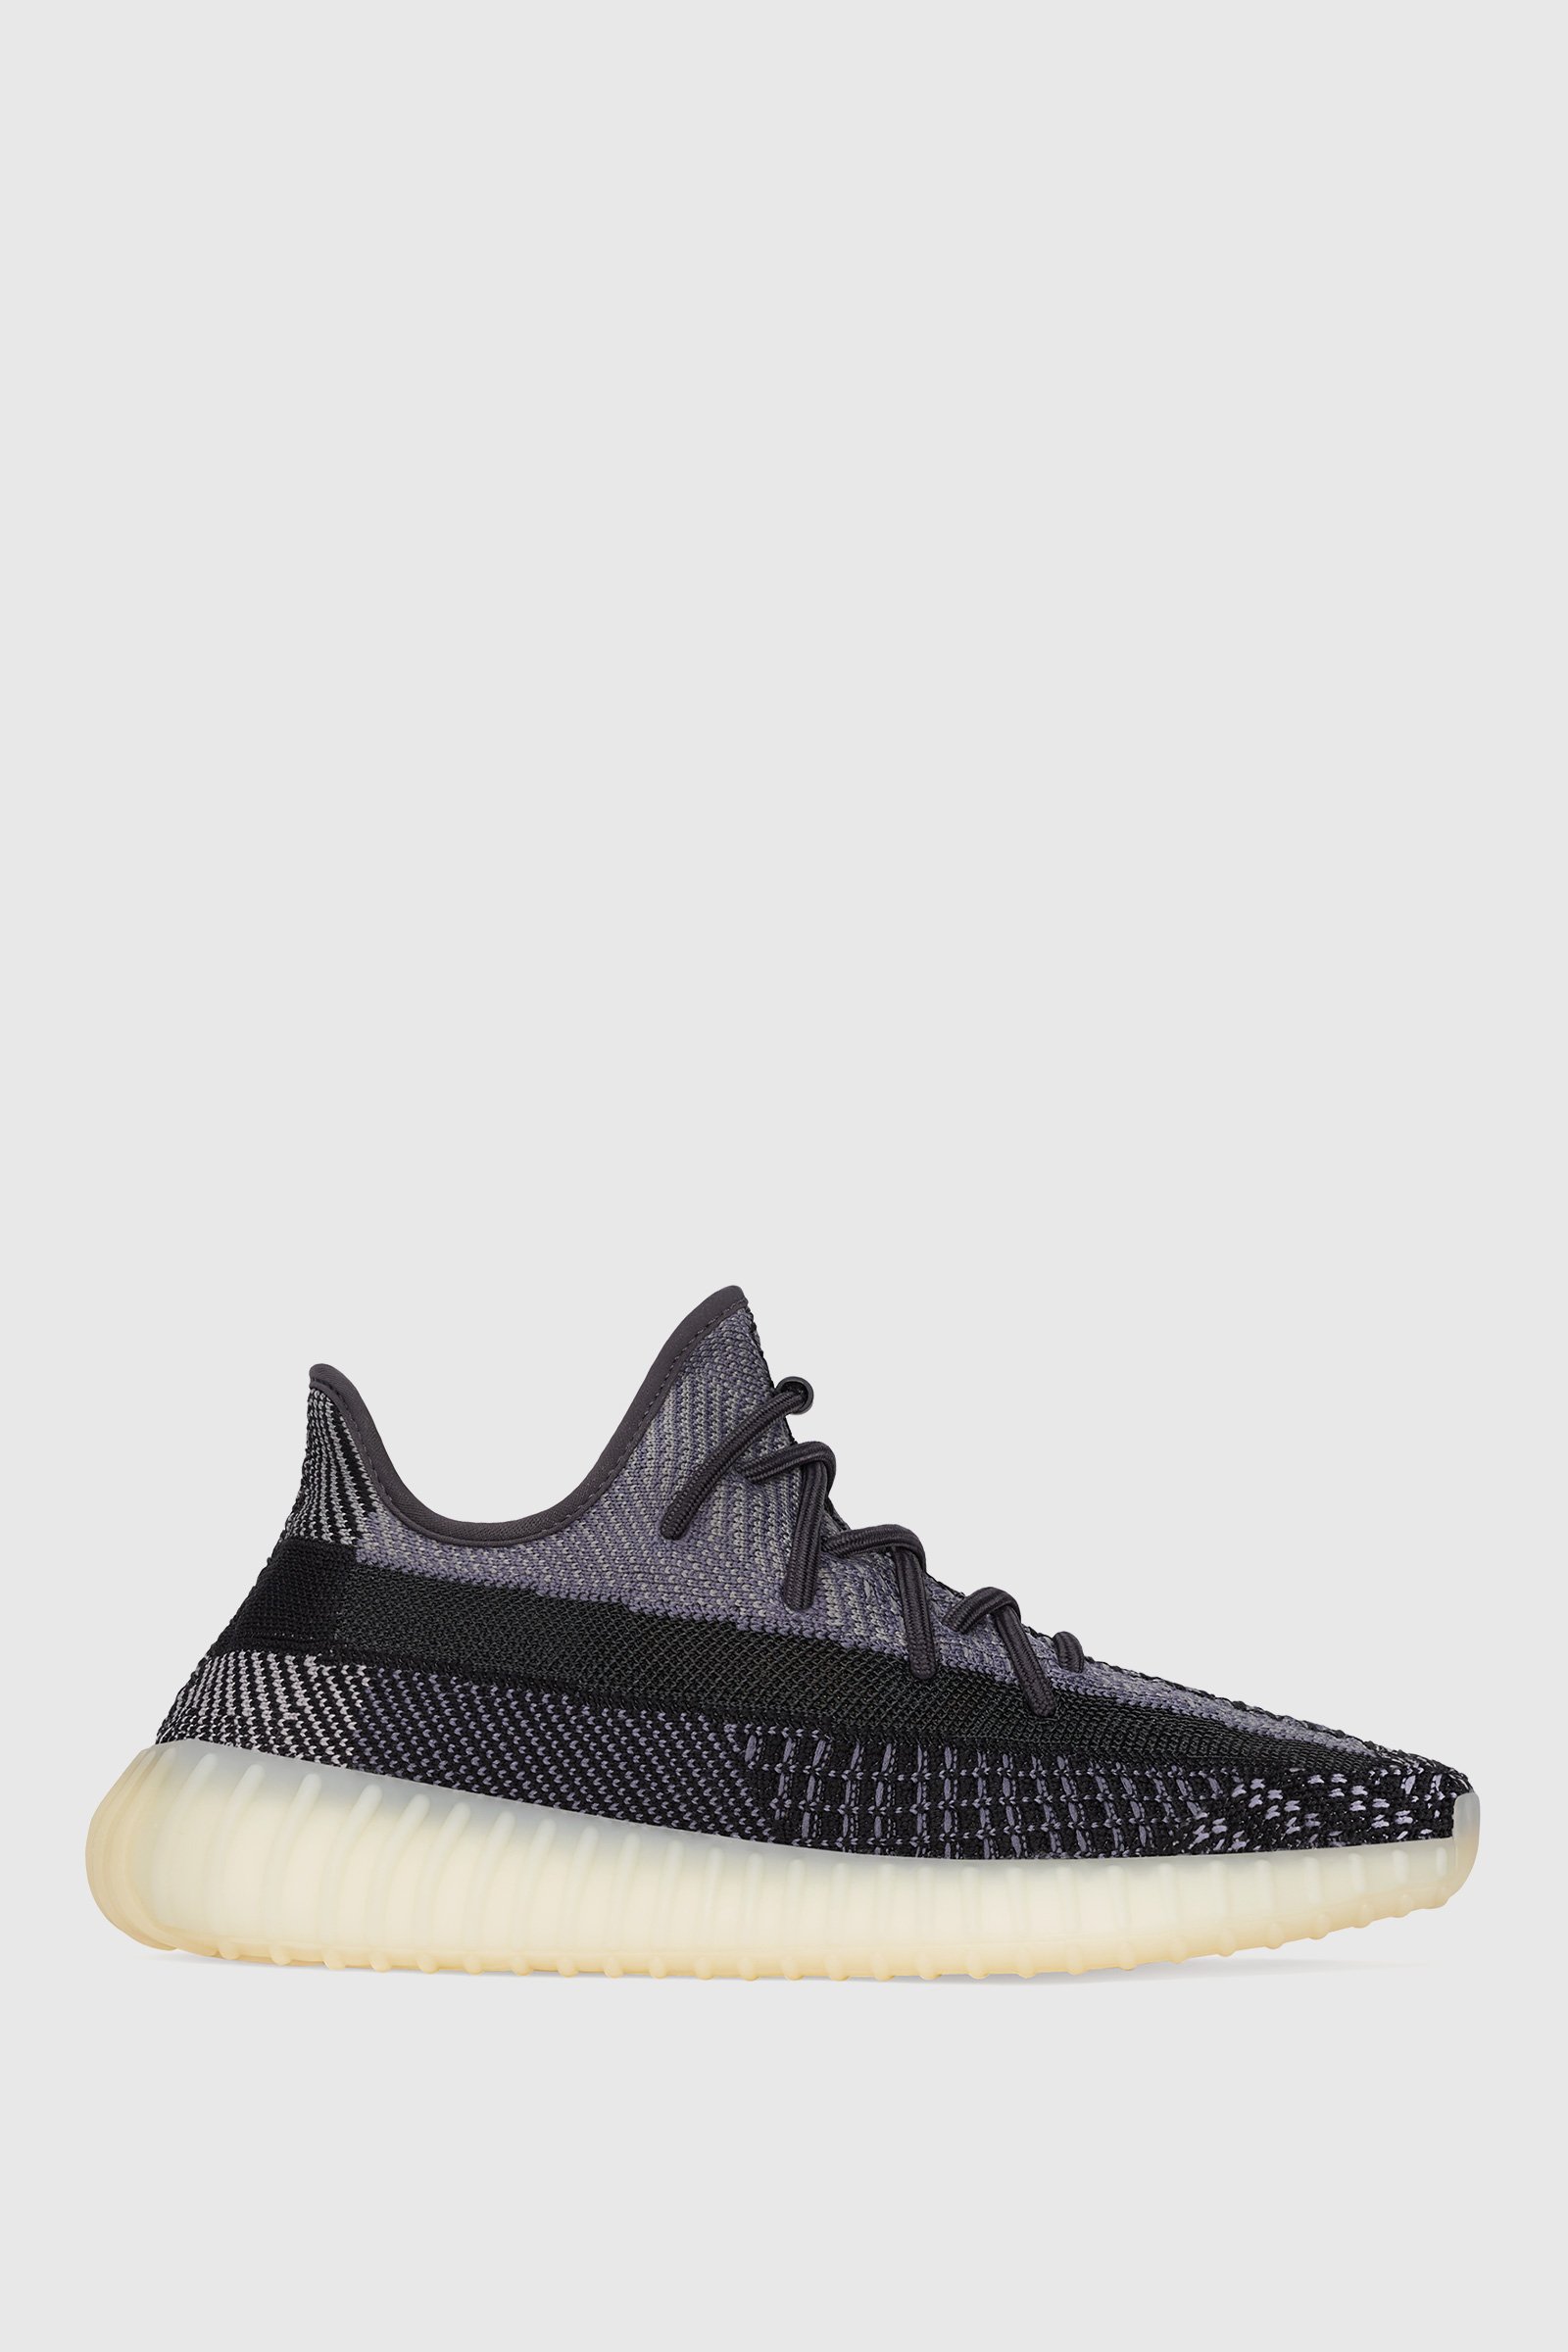 Wood Wood - Yeezy Boost 350 V2 'Carbon'